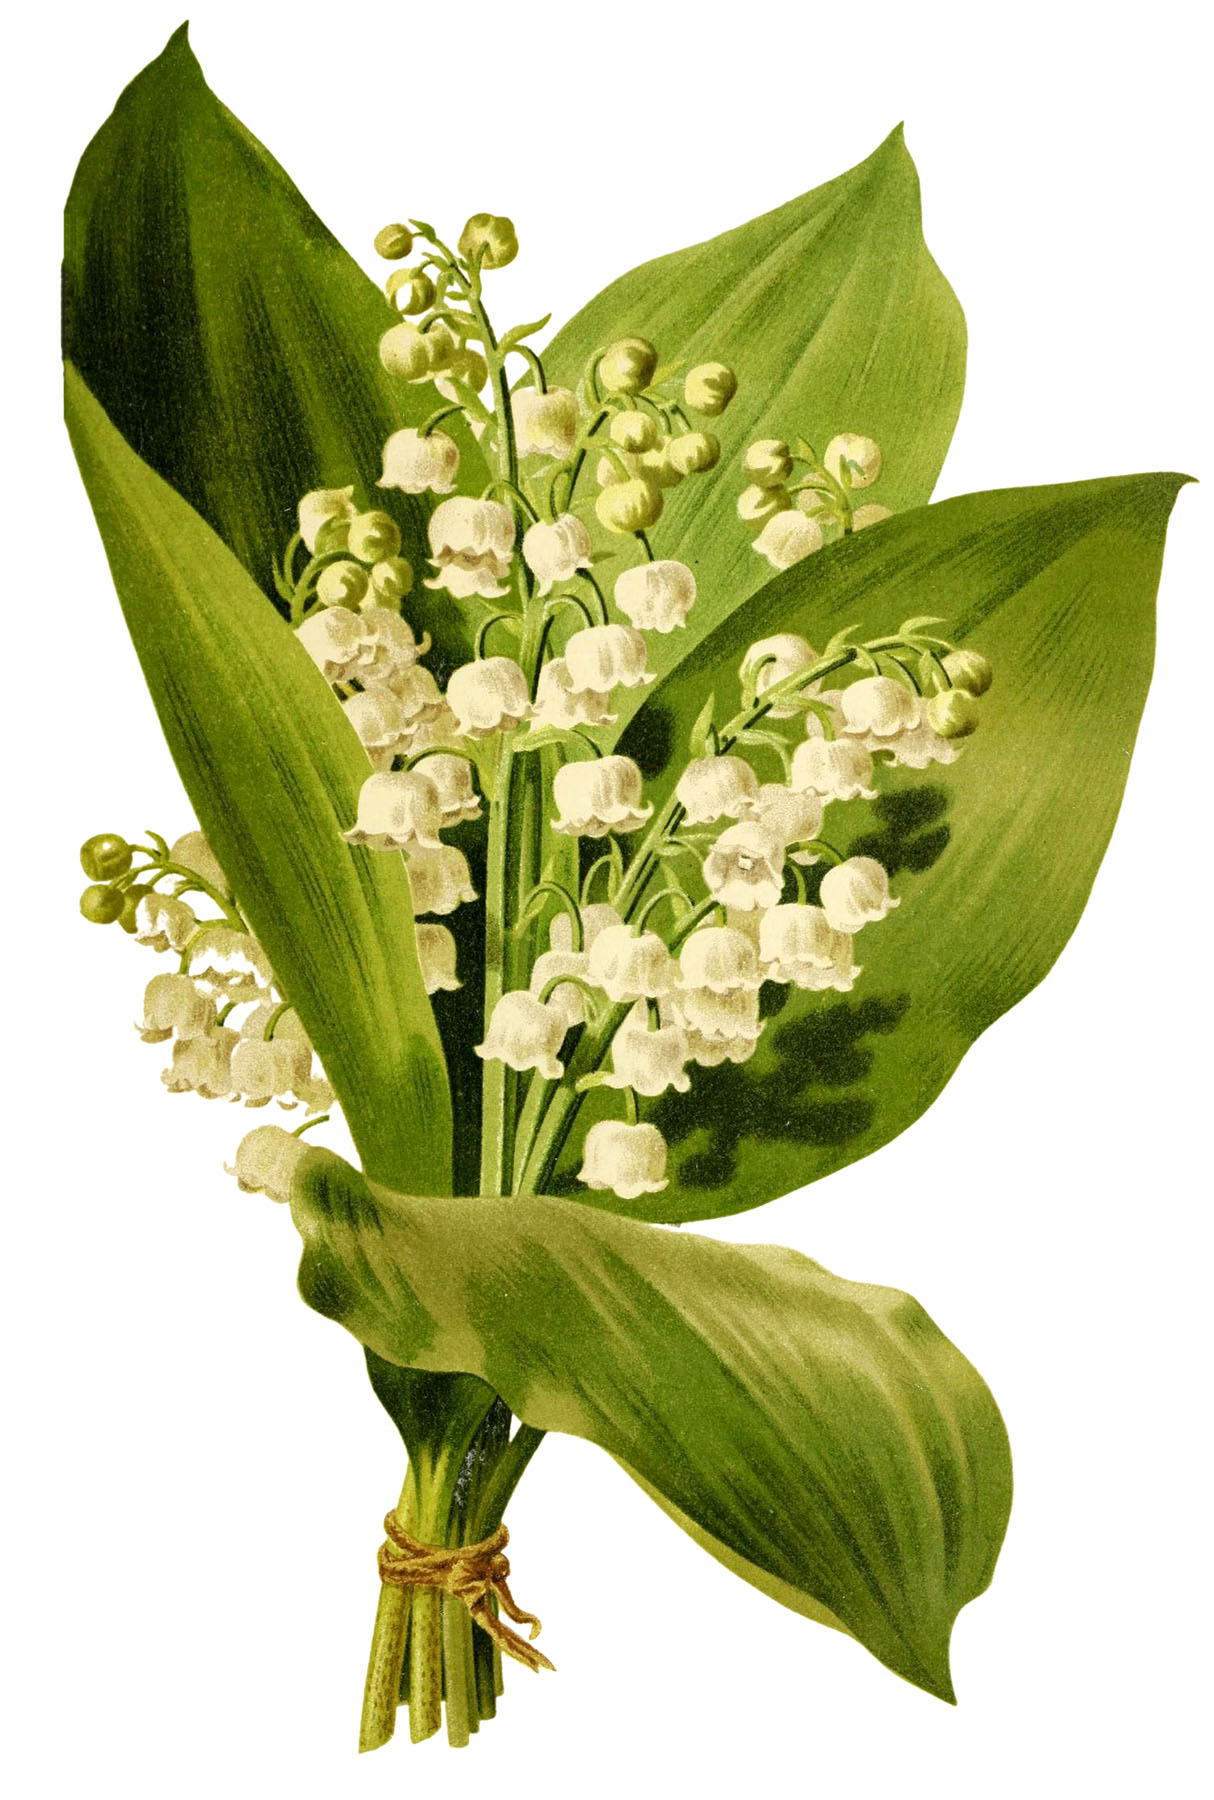 20 Pictures of Lily of the Valley   The Graphics Fairy